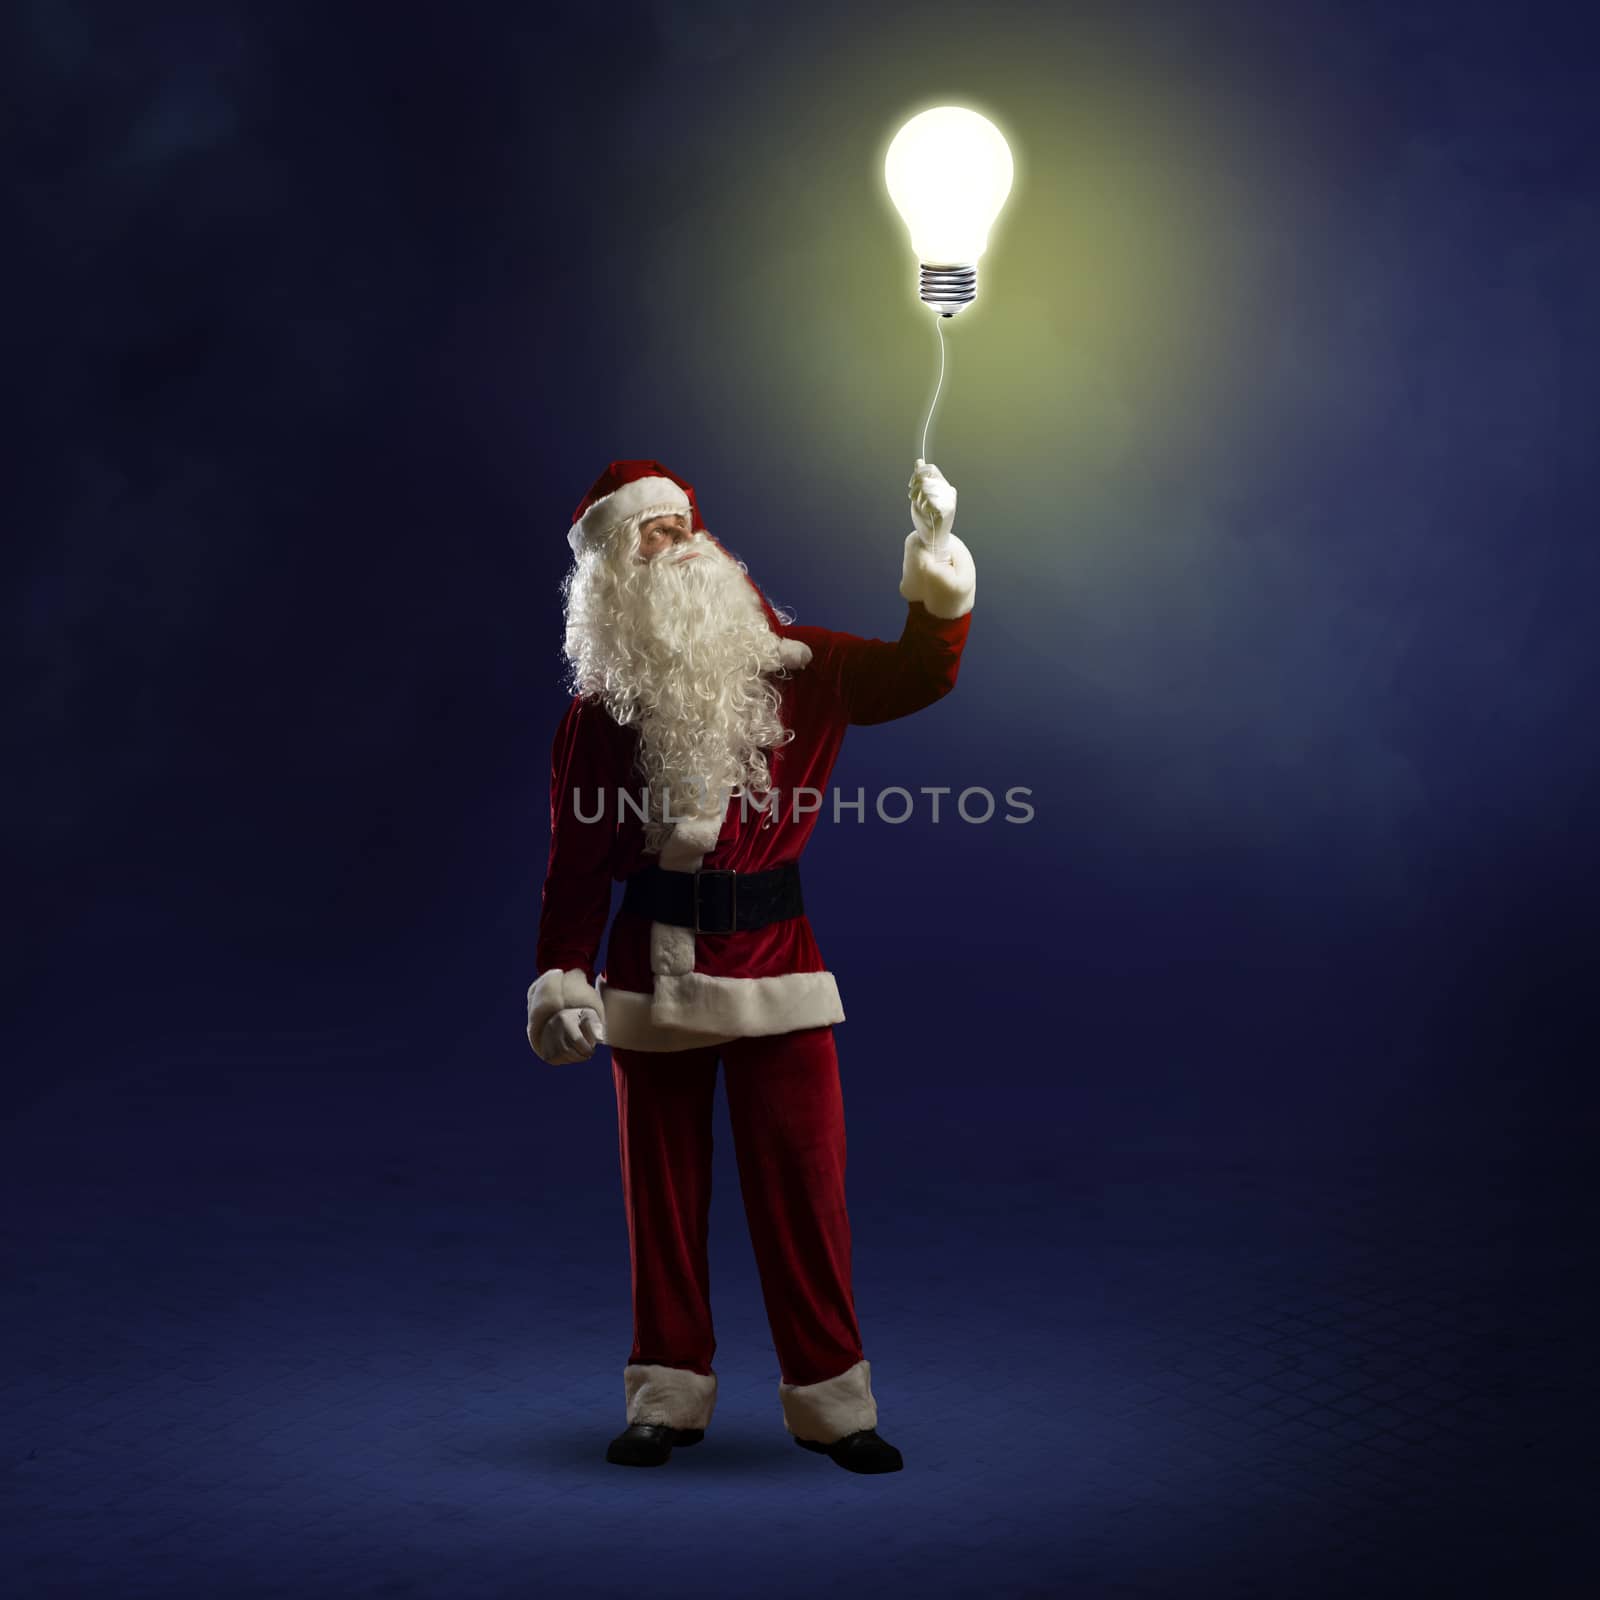 Santa Claus is holding a shining lamp on a string